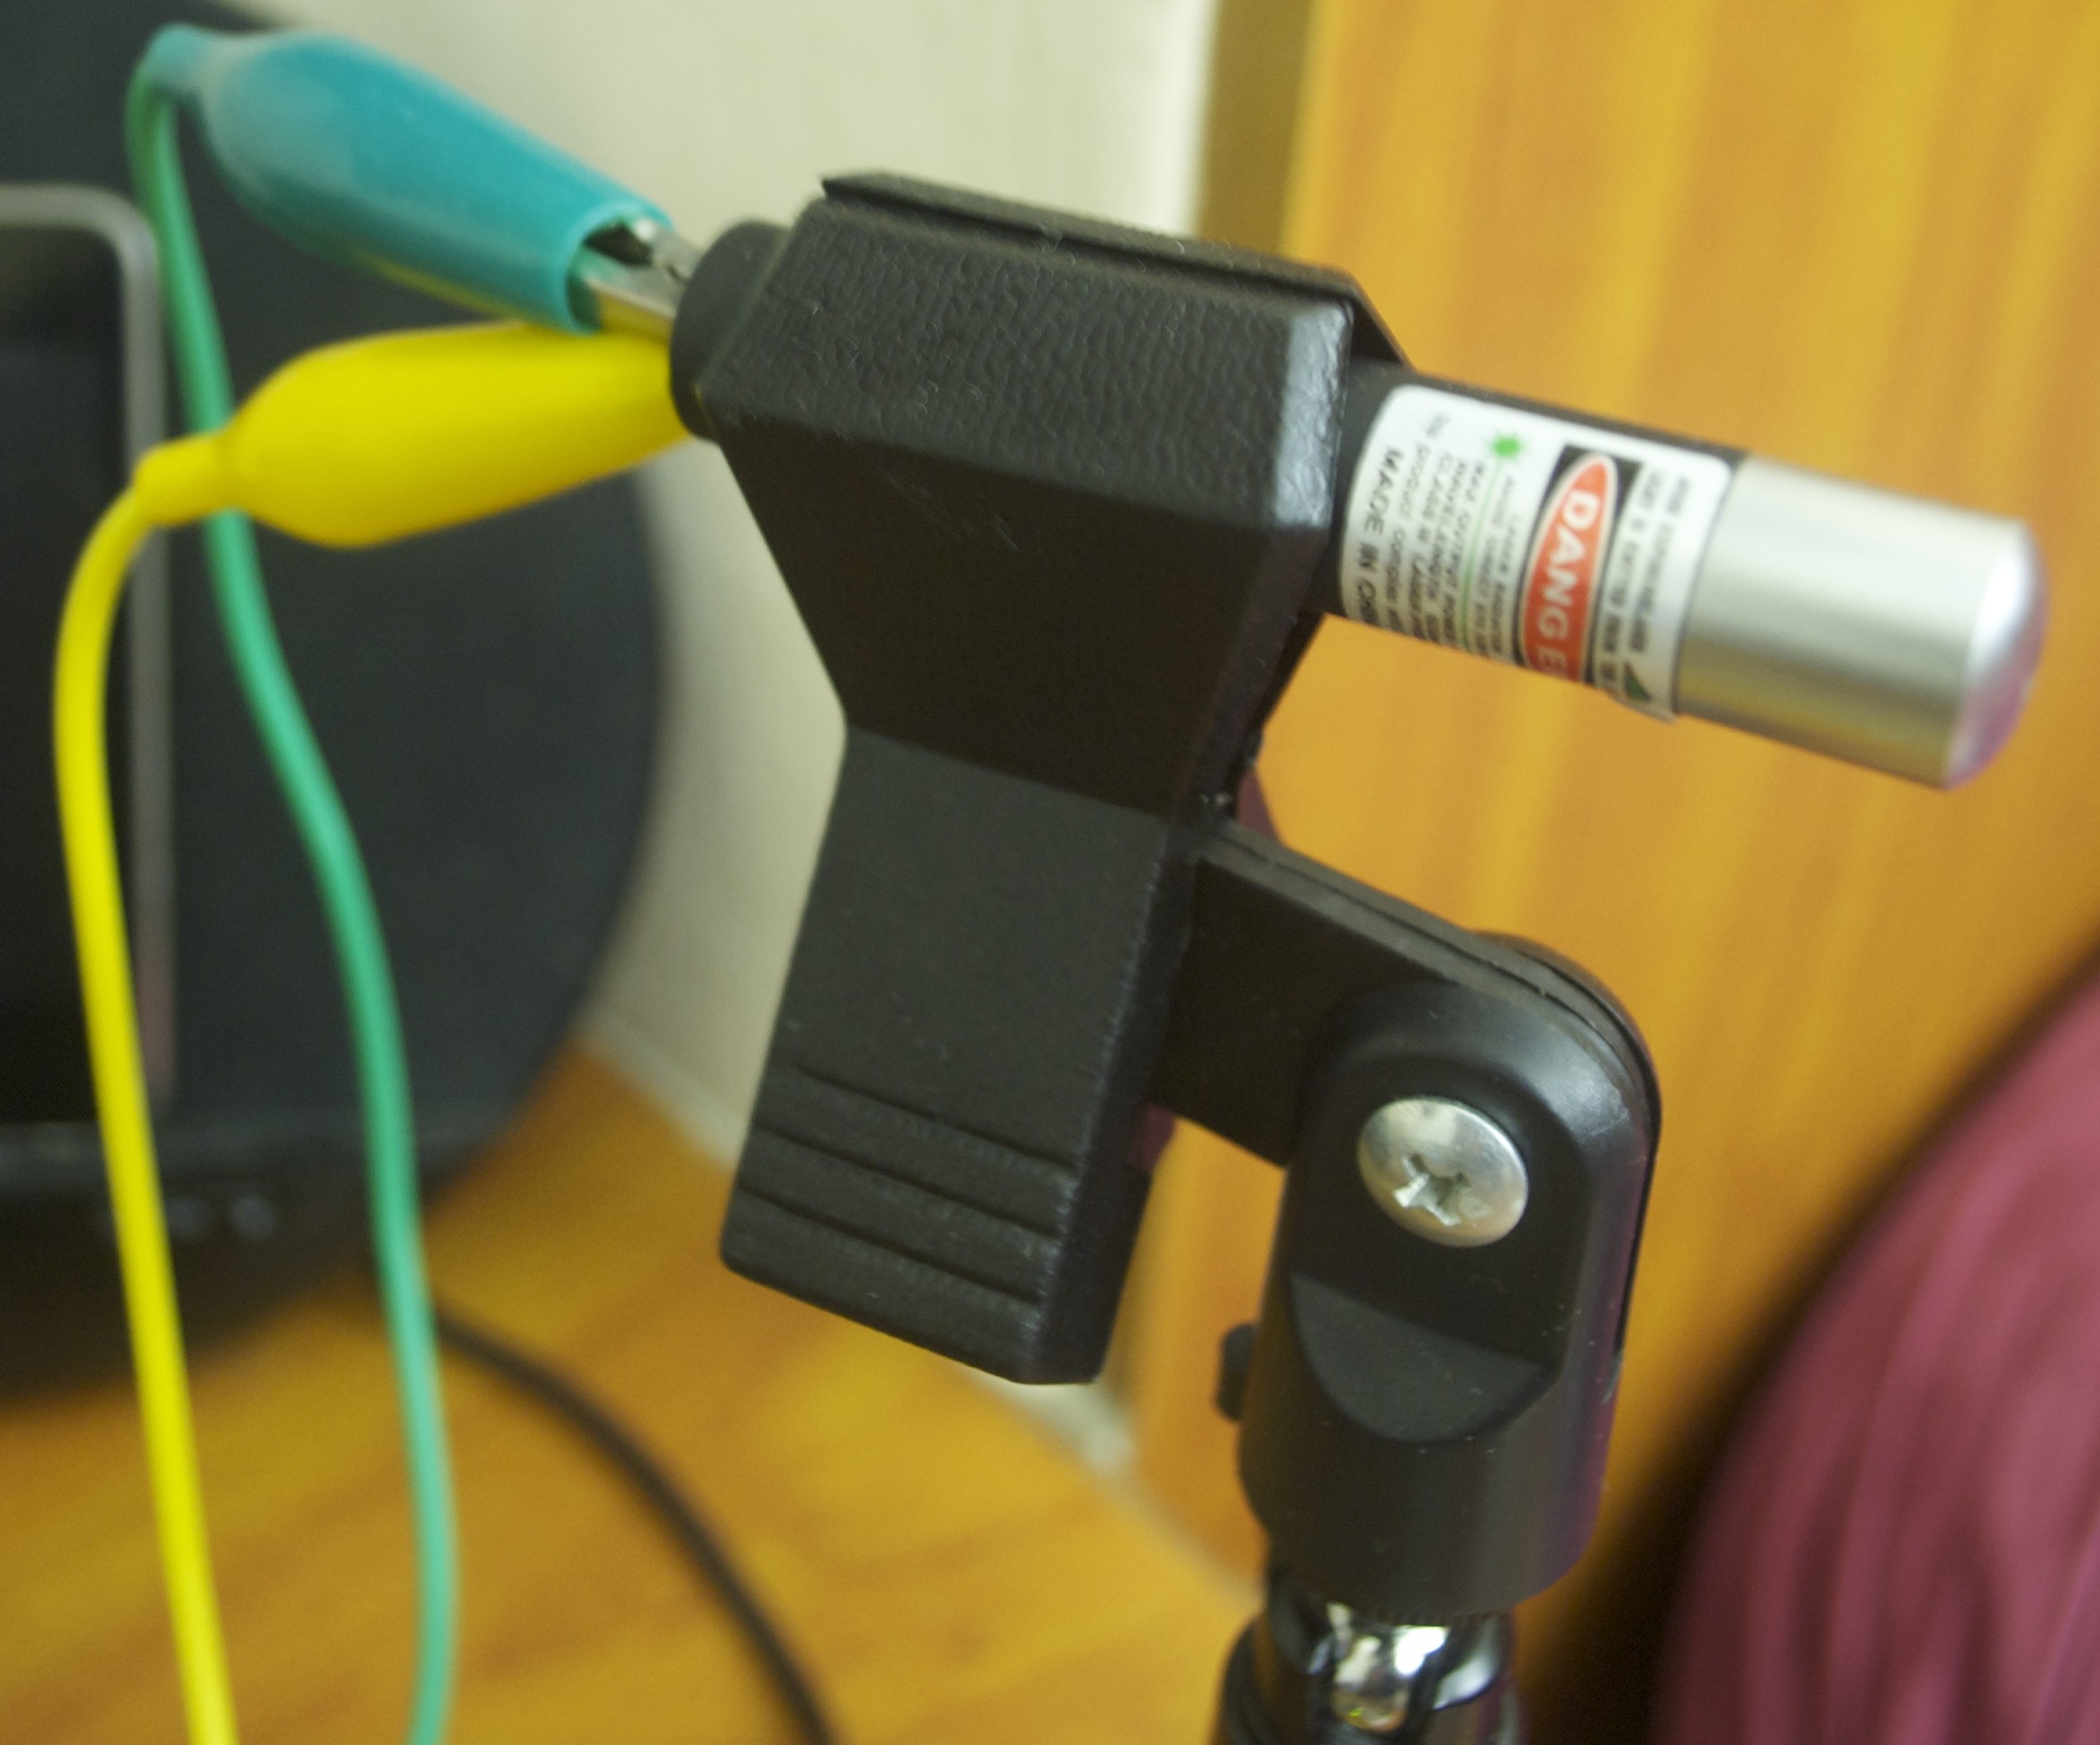 The laser pointer. It's held in a microphone clip mounted on a tiny tripod.